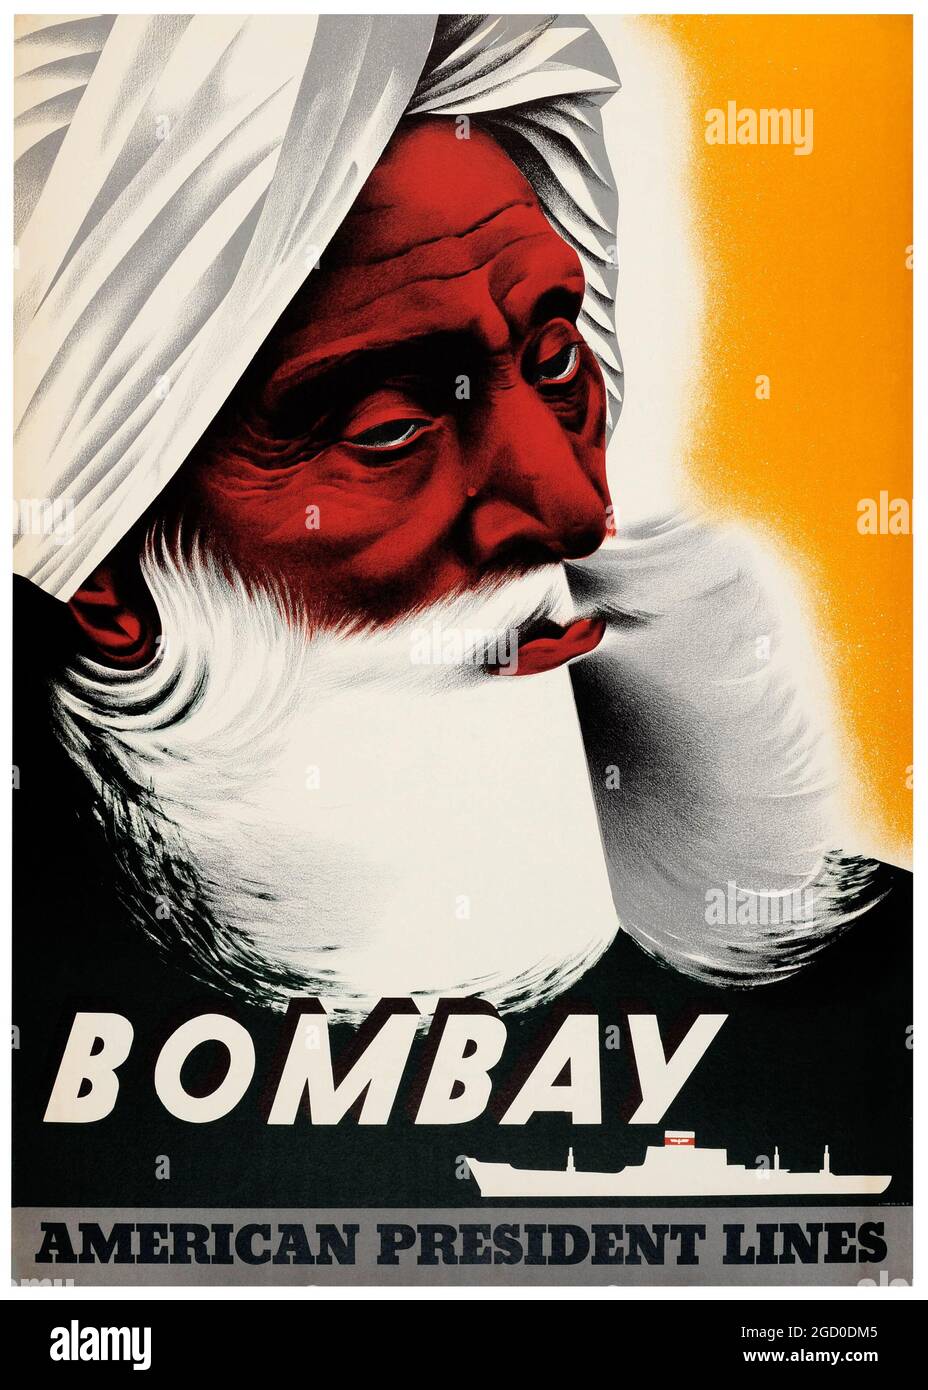 Vintage Cruise Ship Travel Poster Bombay India, American President Lines – USA 1950s. Bombay (now Mumbai) India. Artist unknown. Man in a turban. Stock Photo